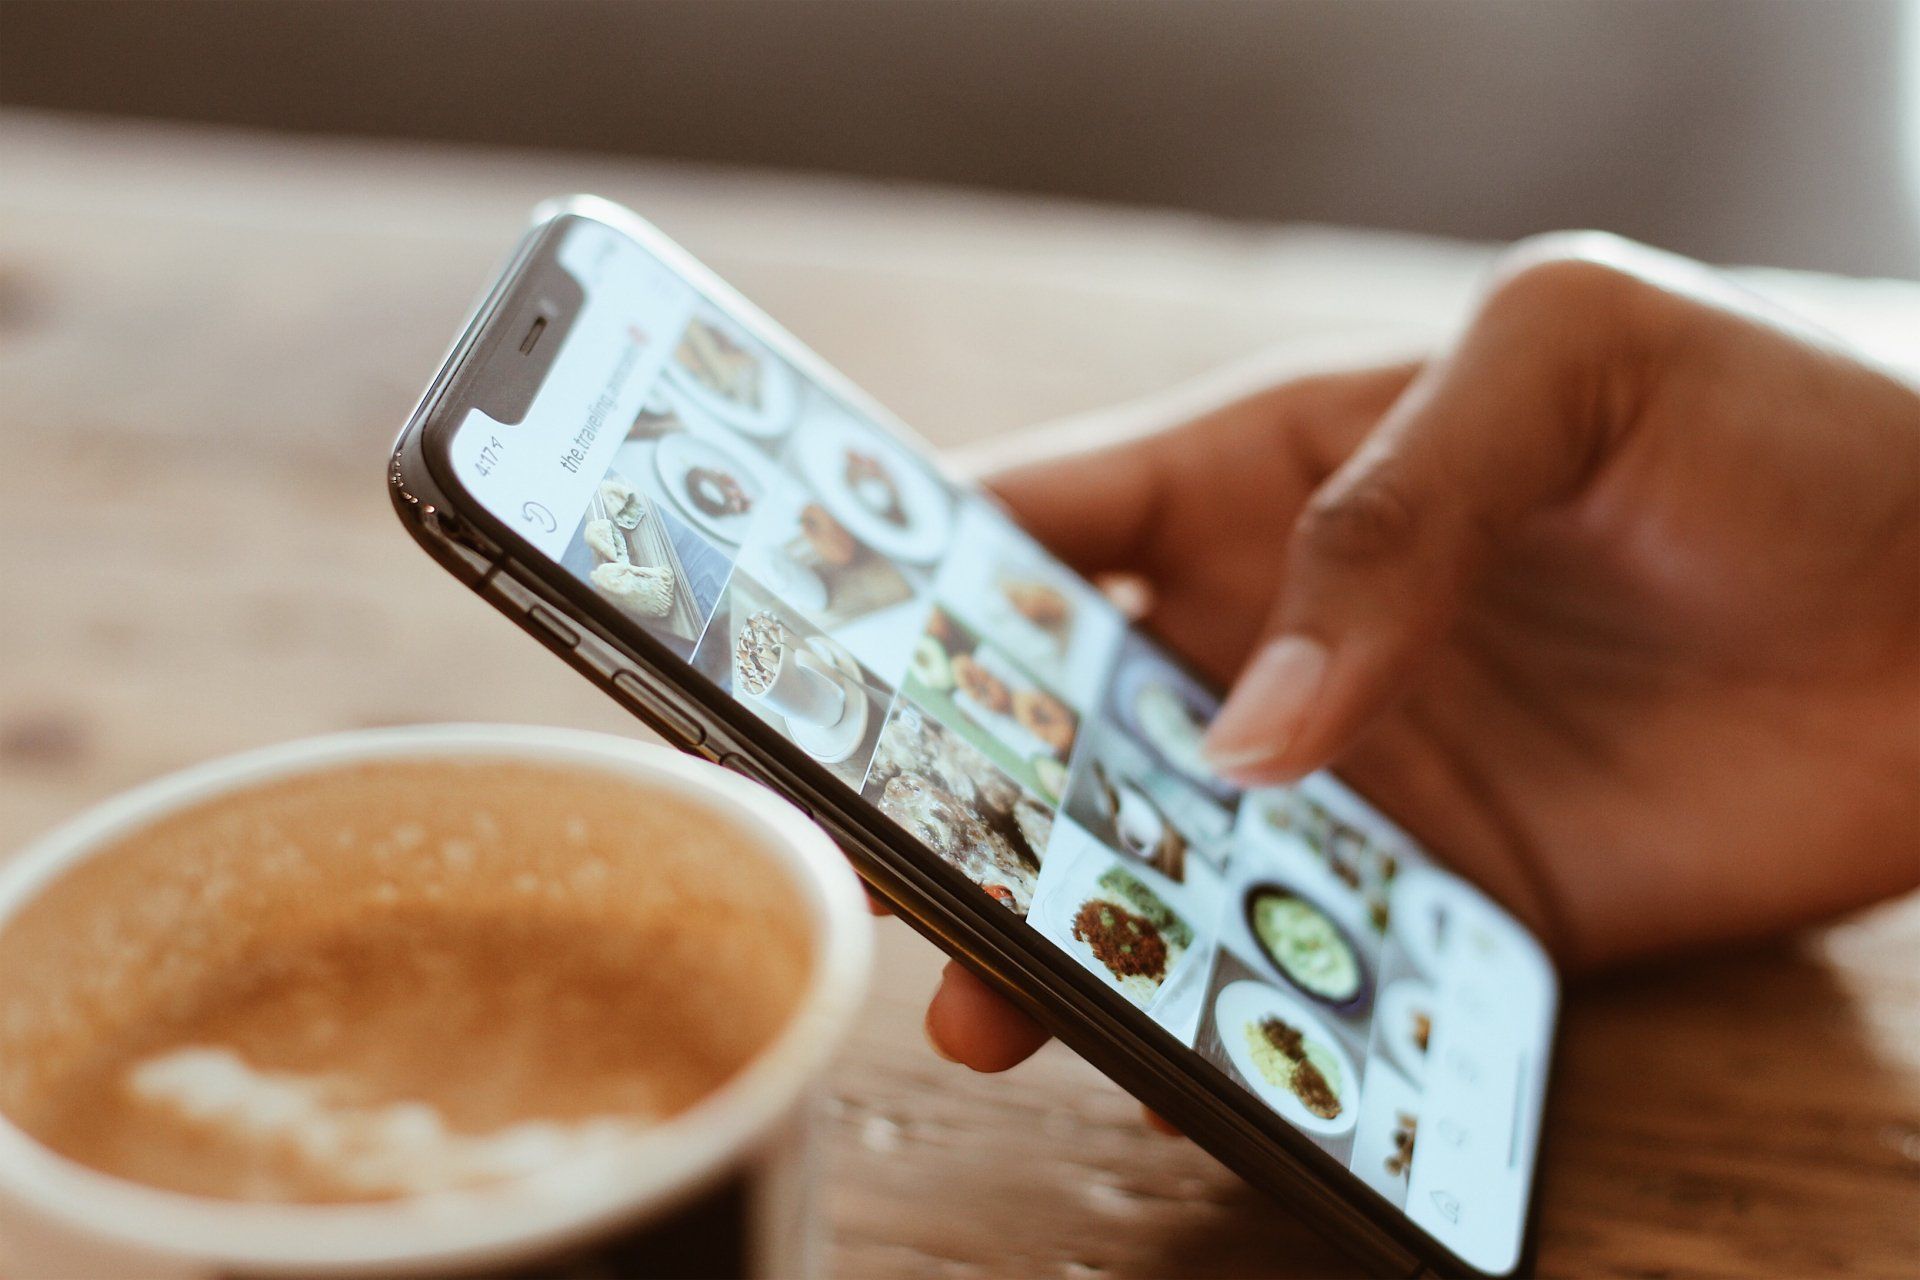 A person is using a cell phone next to a cup of coffee